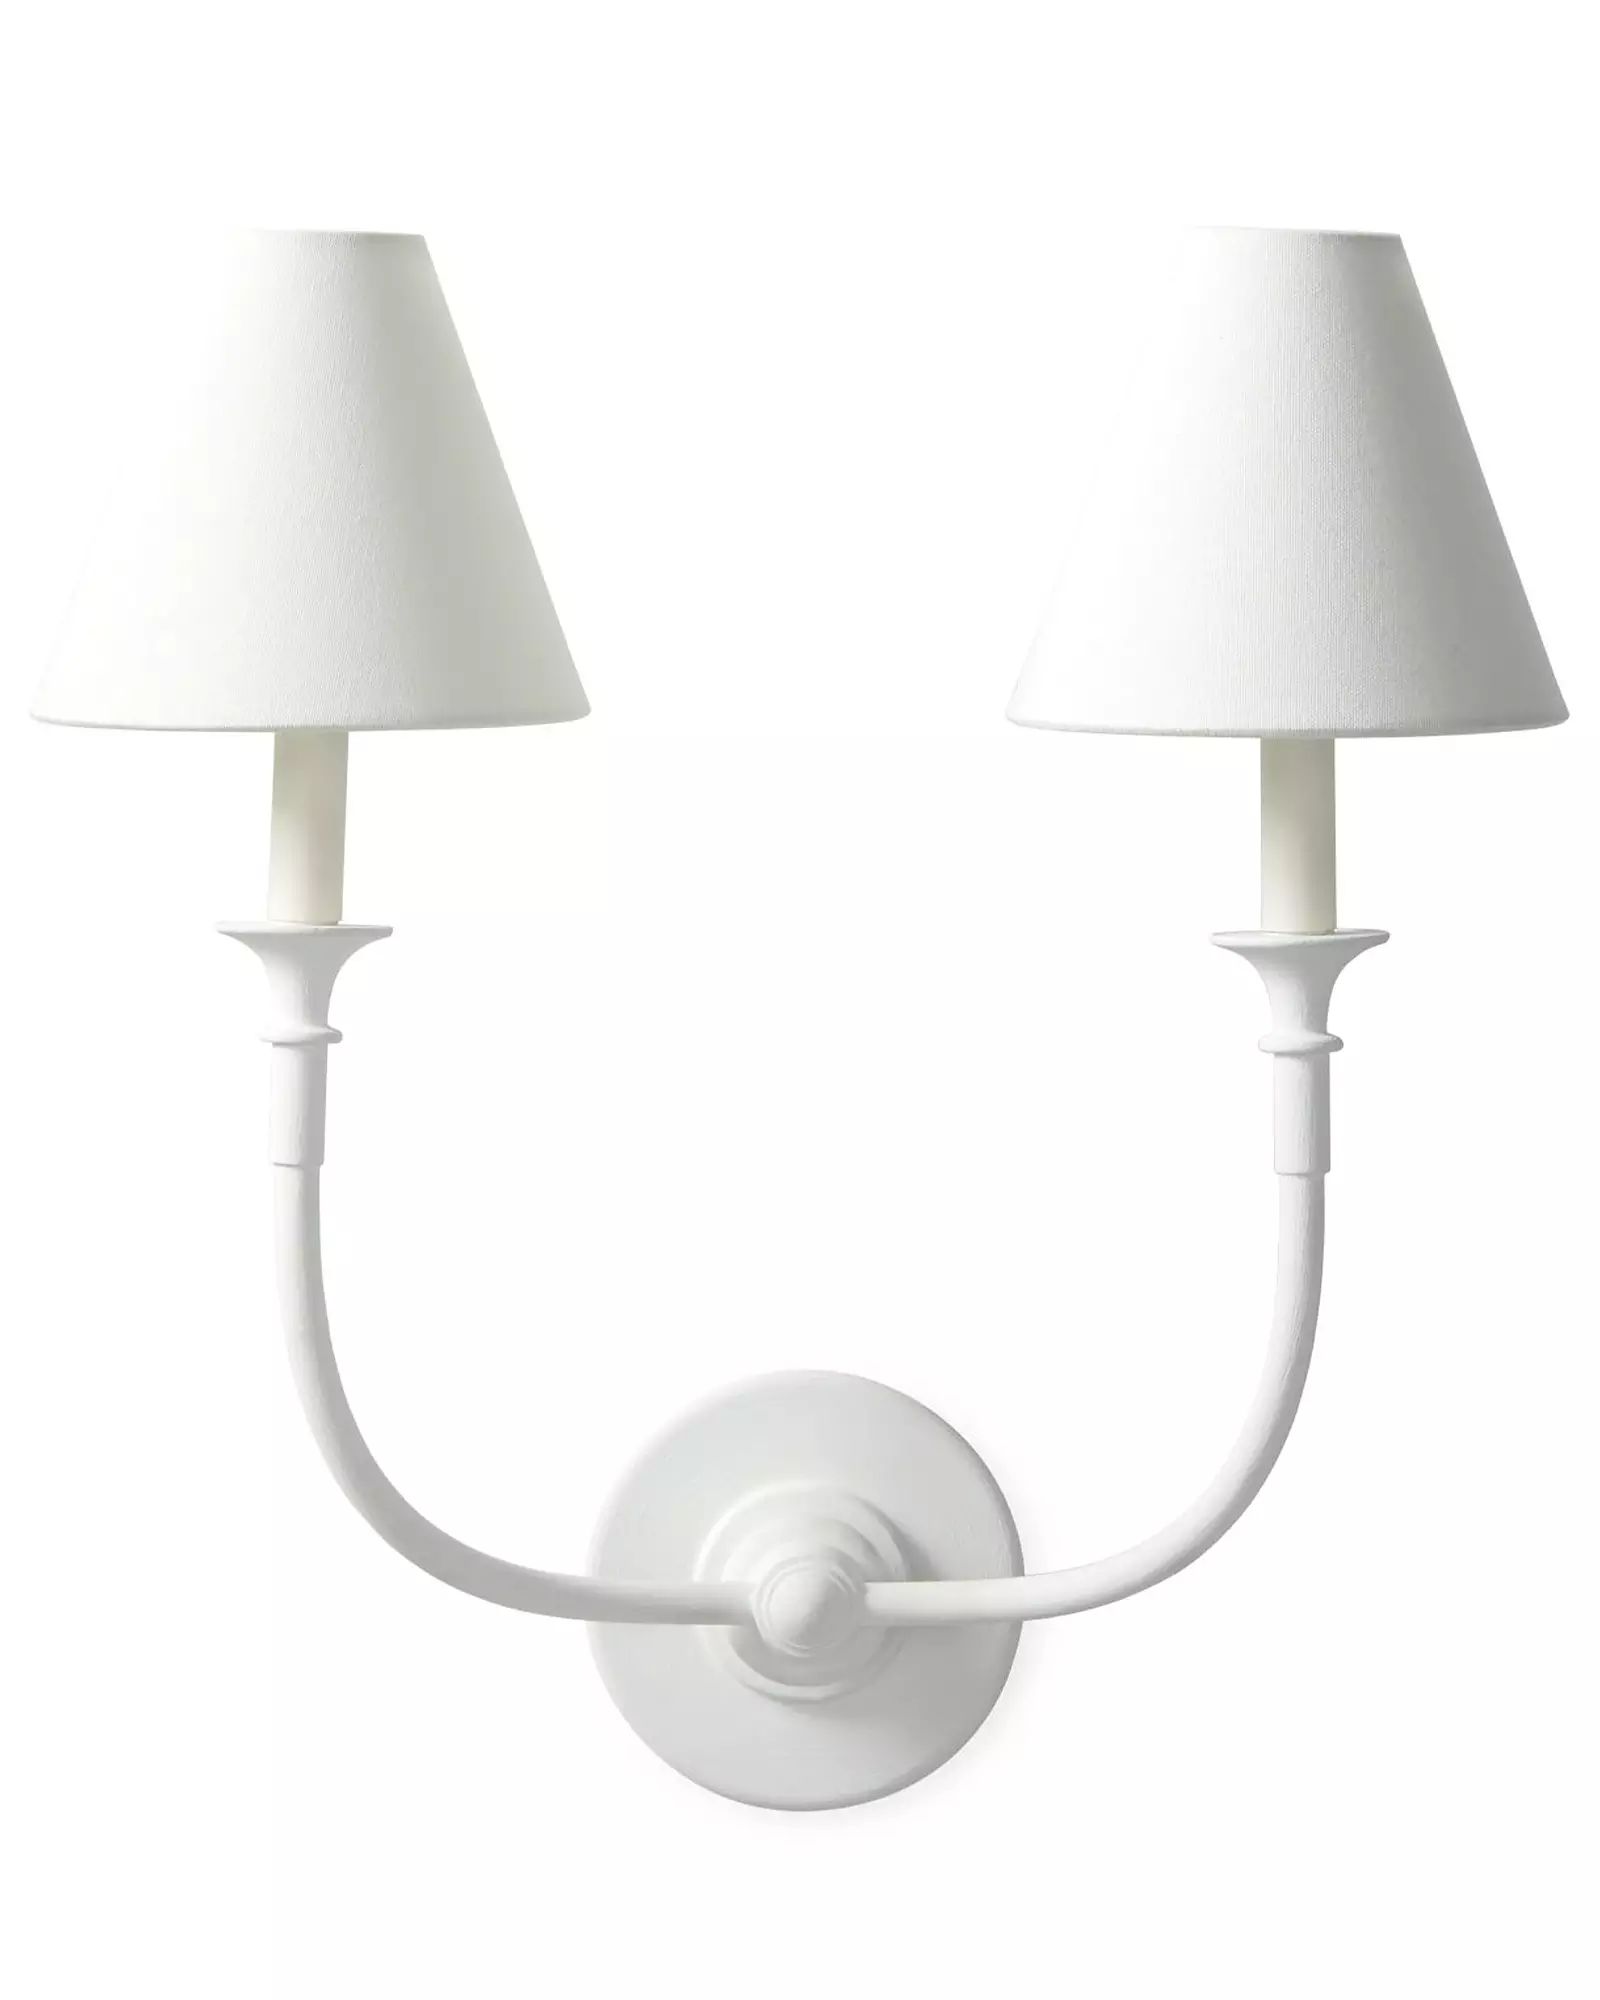 Portola Double Sconce | Serena and Lily